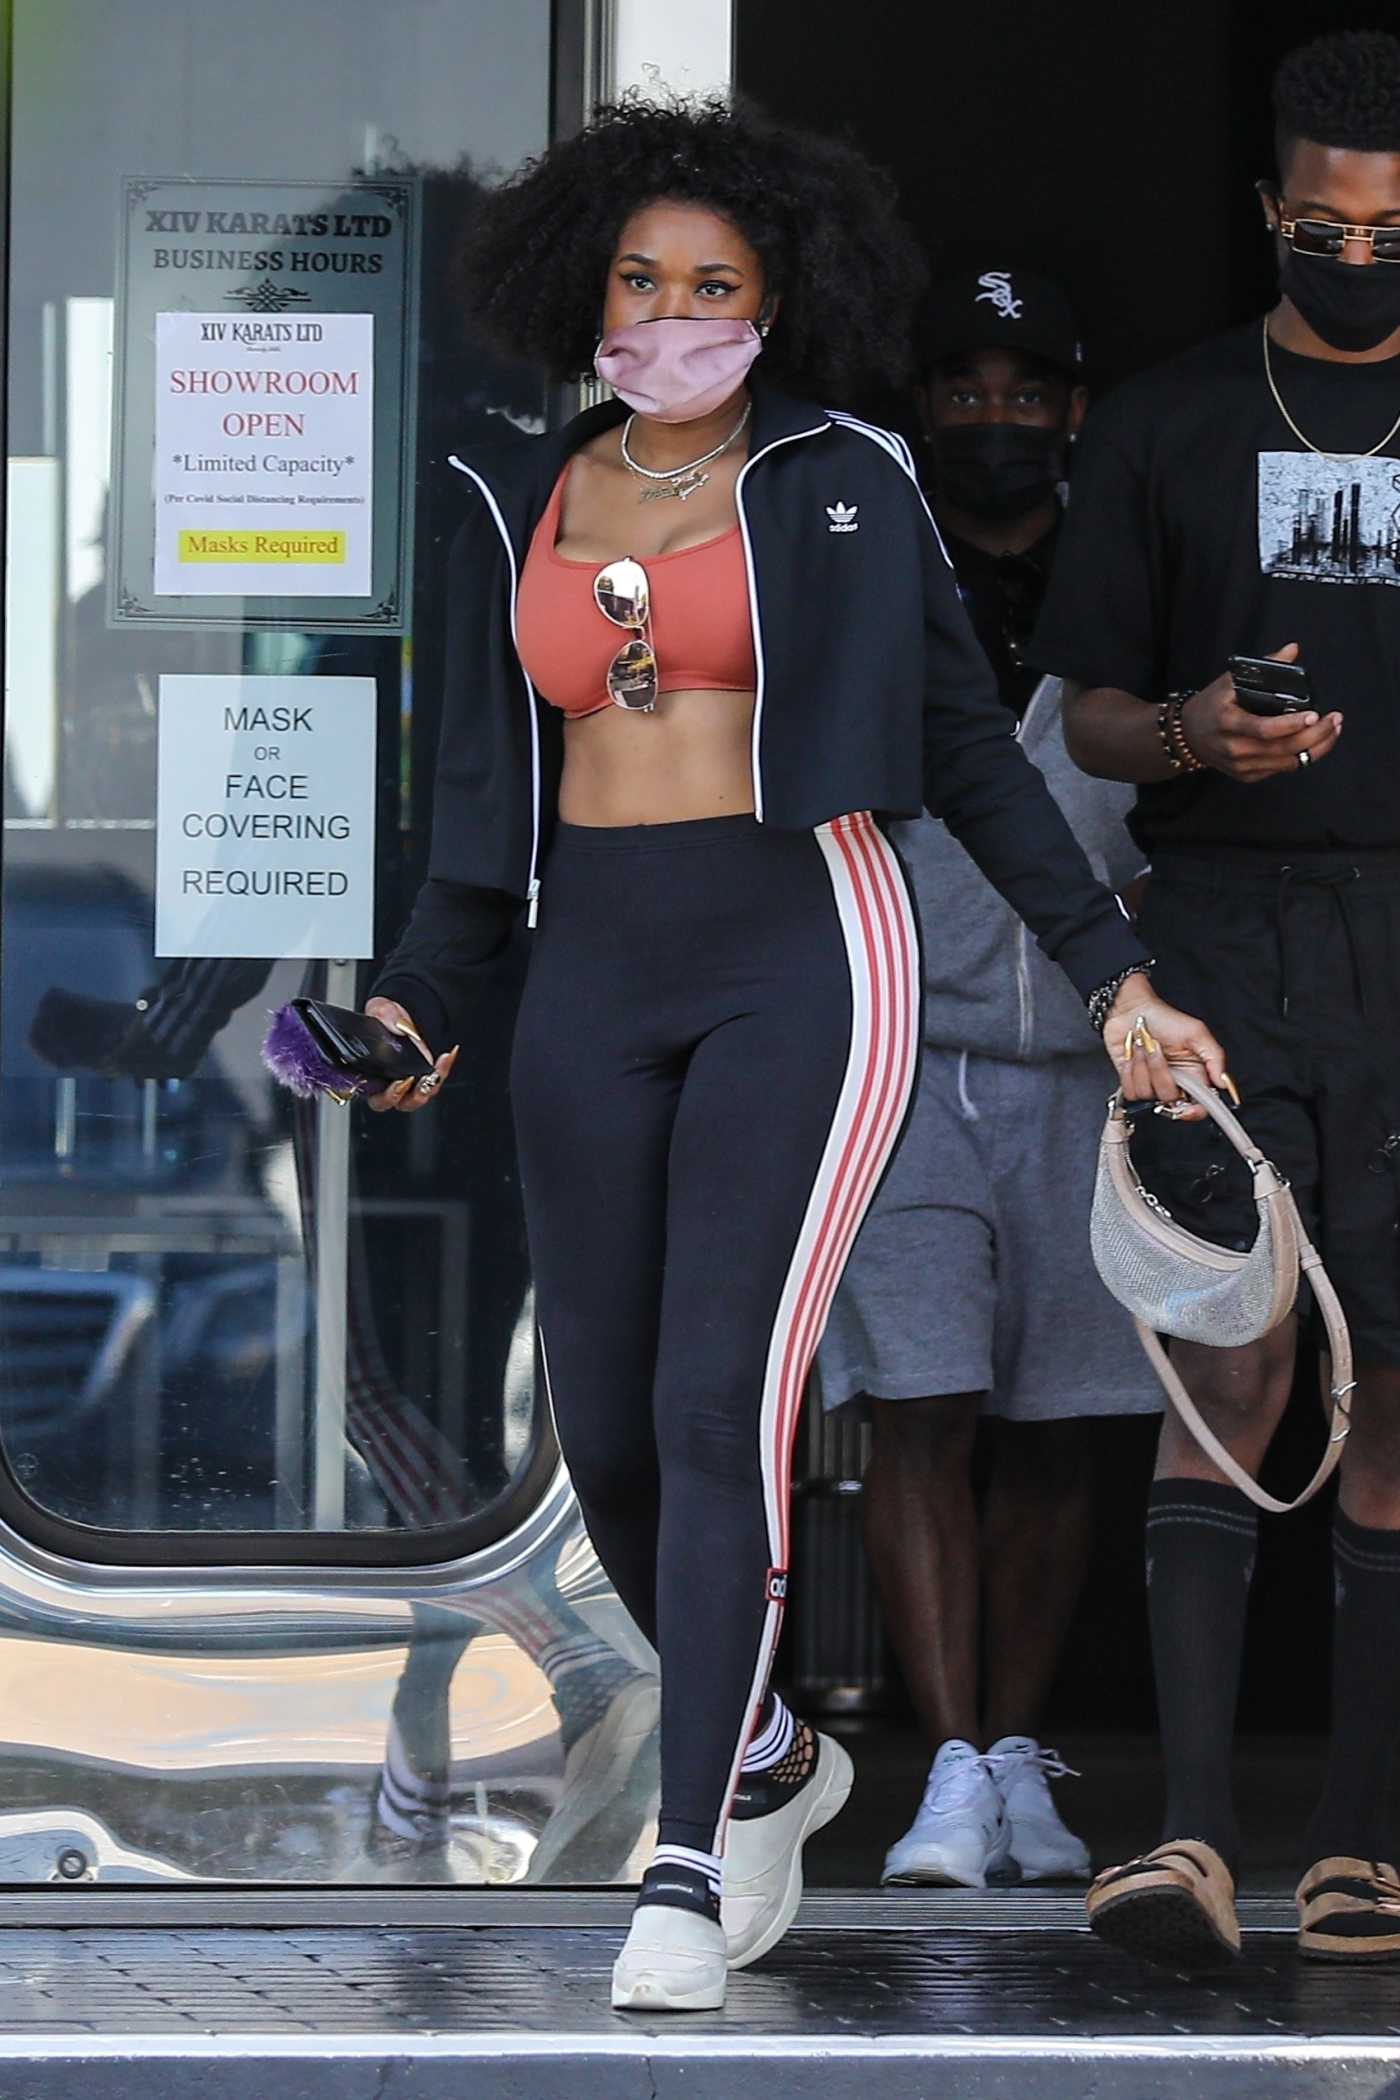 Jennifer Hudson in a Black Adidas Tracksuit Picks up Some New Jewelry at XIV karats in Beverly Hills 05/22/2021